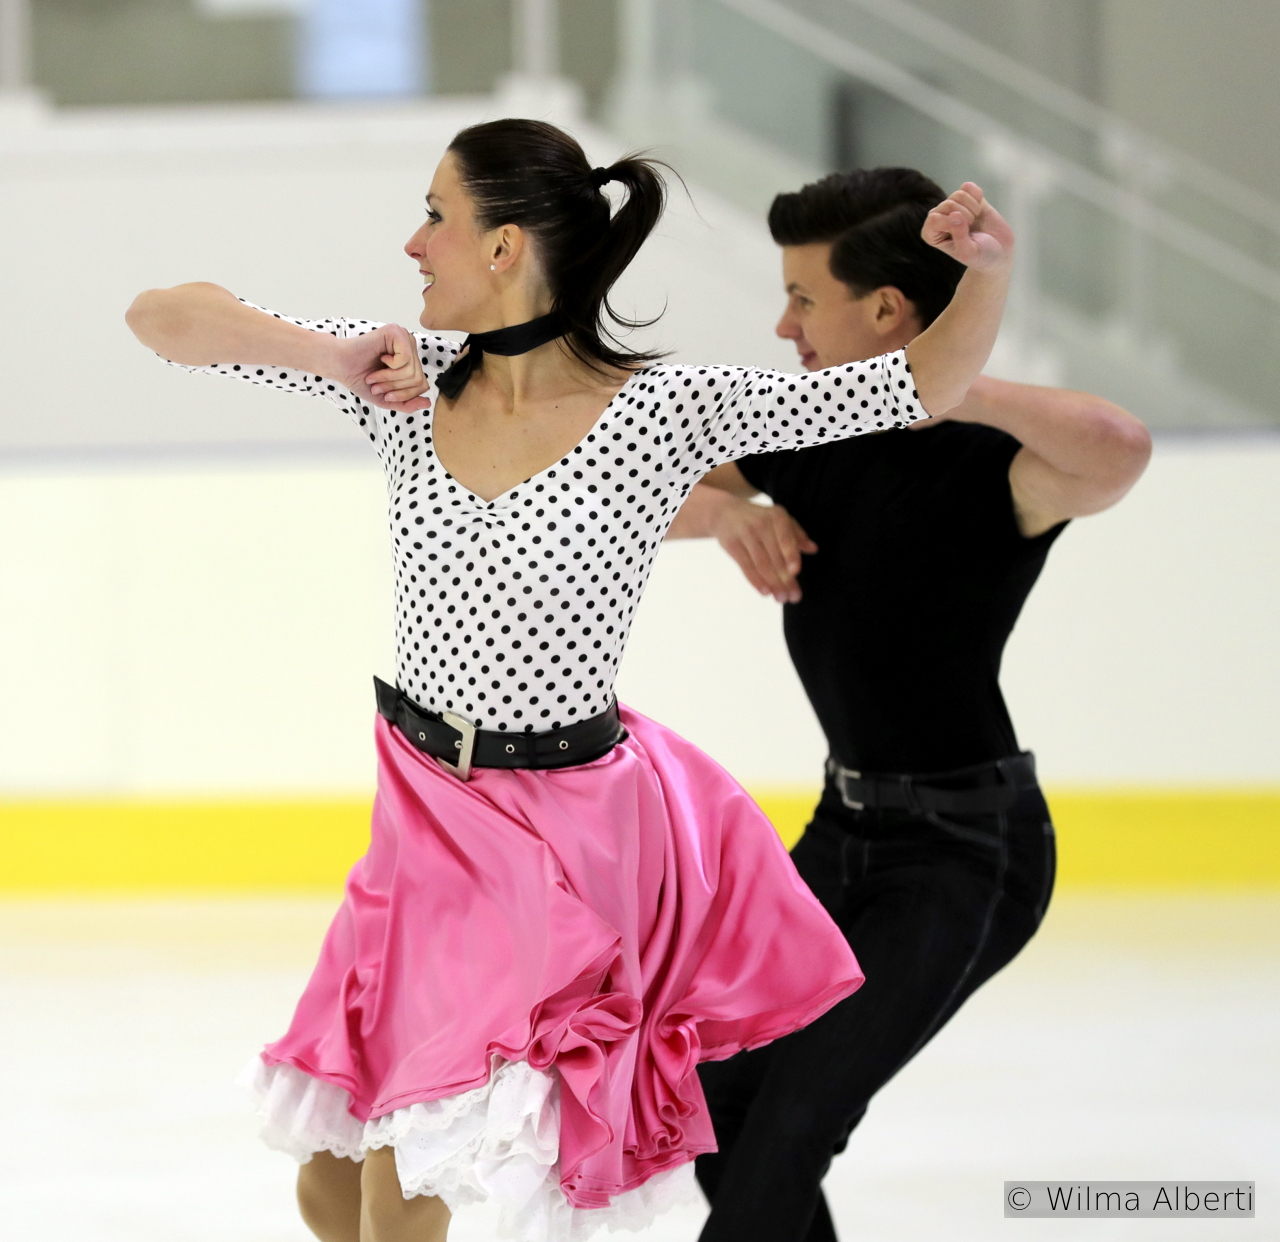 For their short dance, Charlène Guignard and Marco Fabbri have chosen to skate to a Grease Medley – and their costumes are more than telling